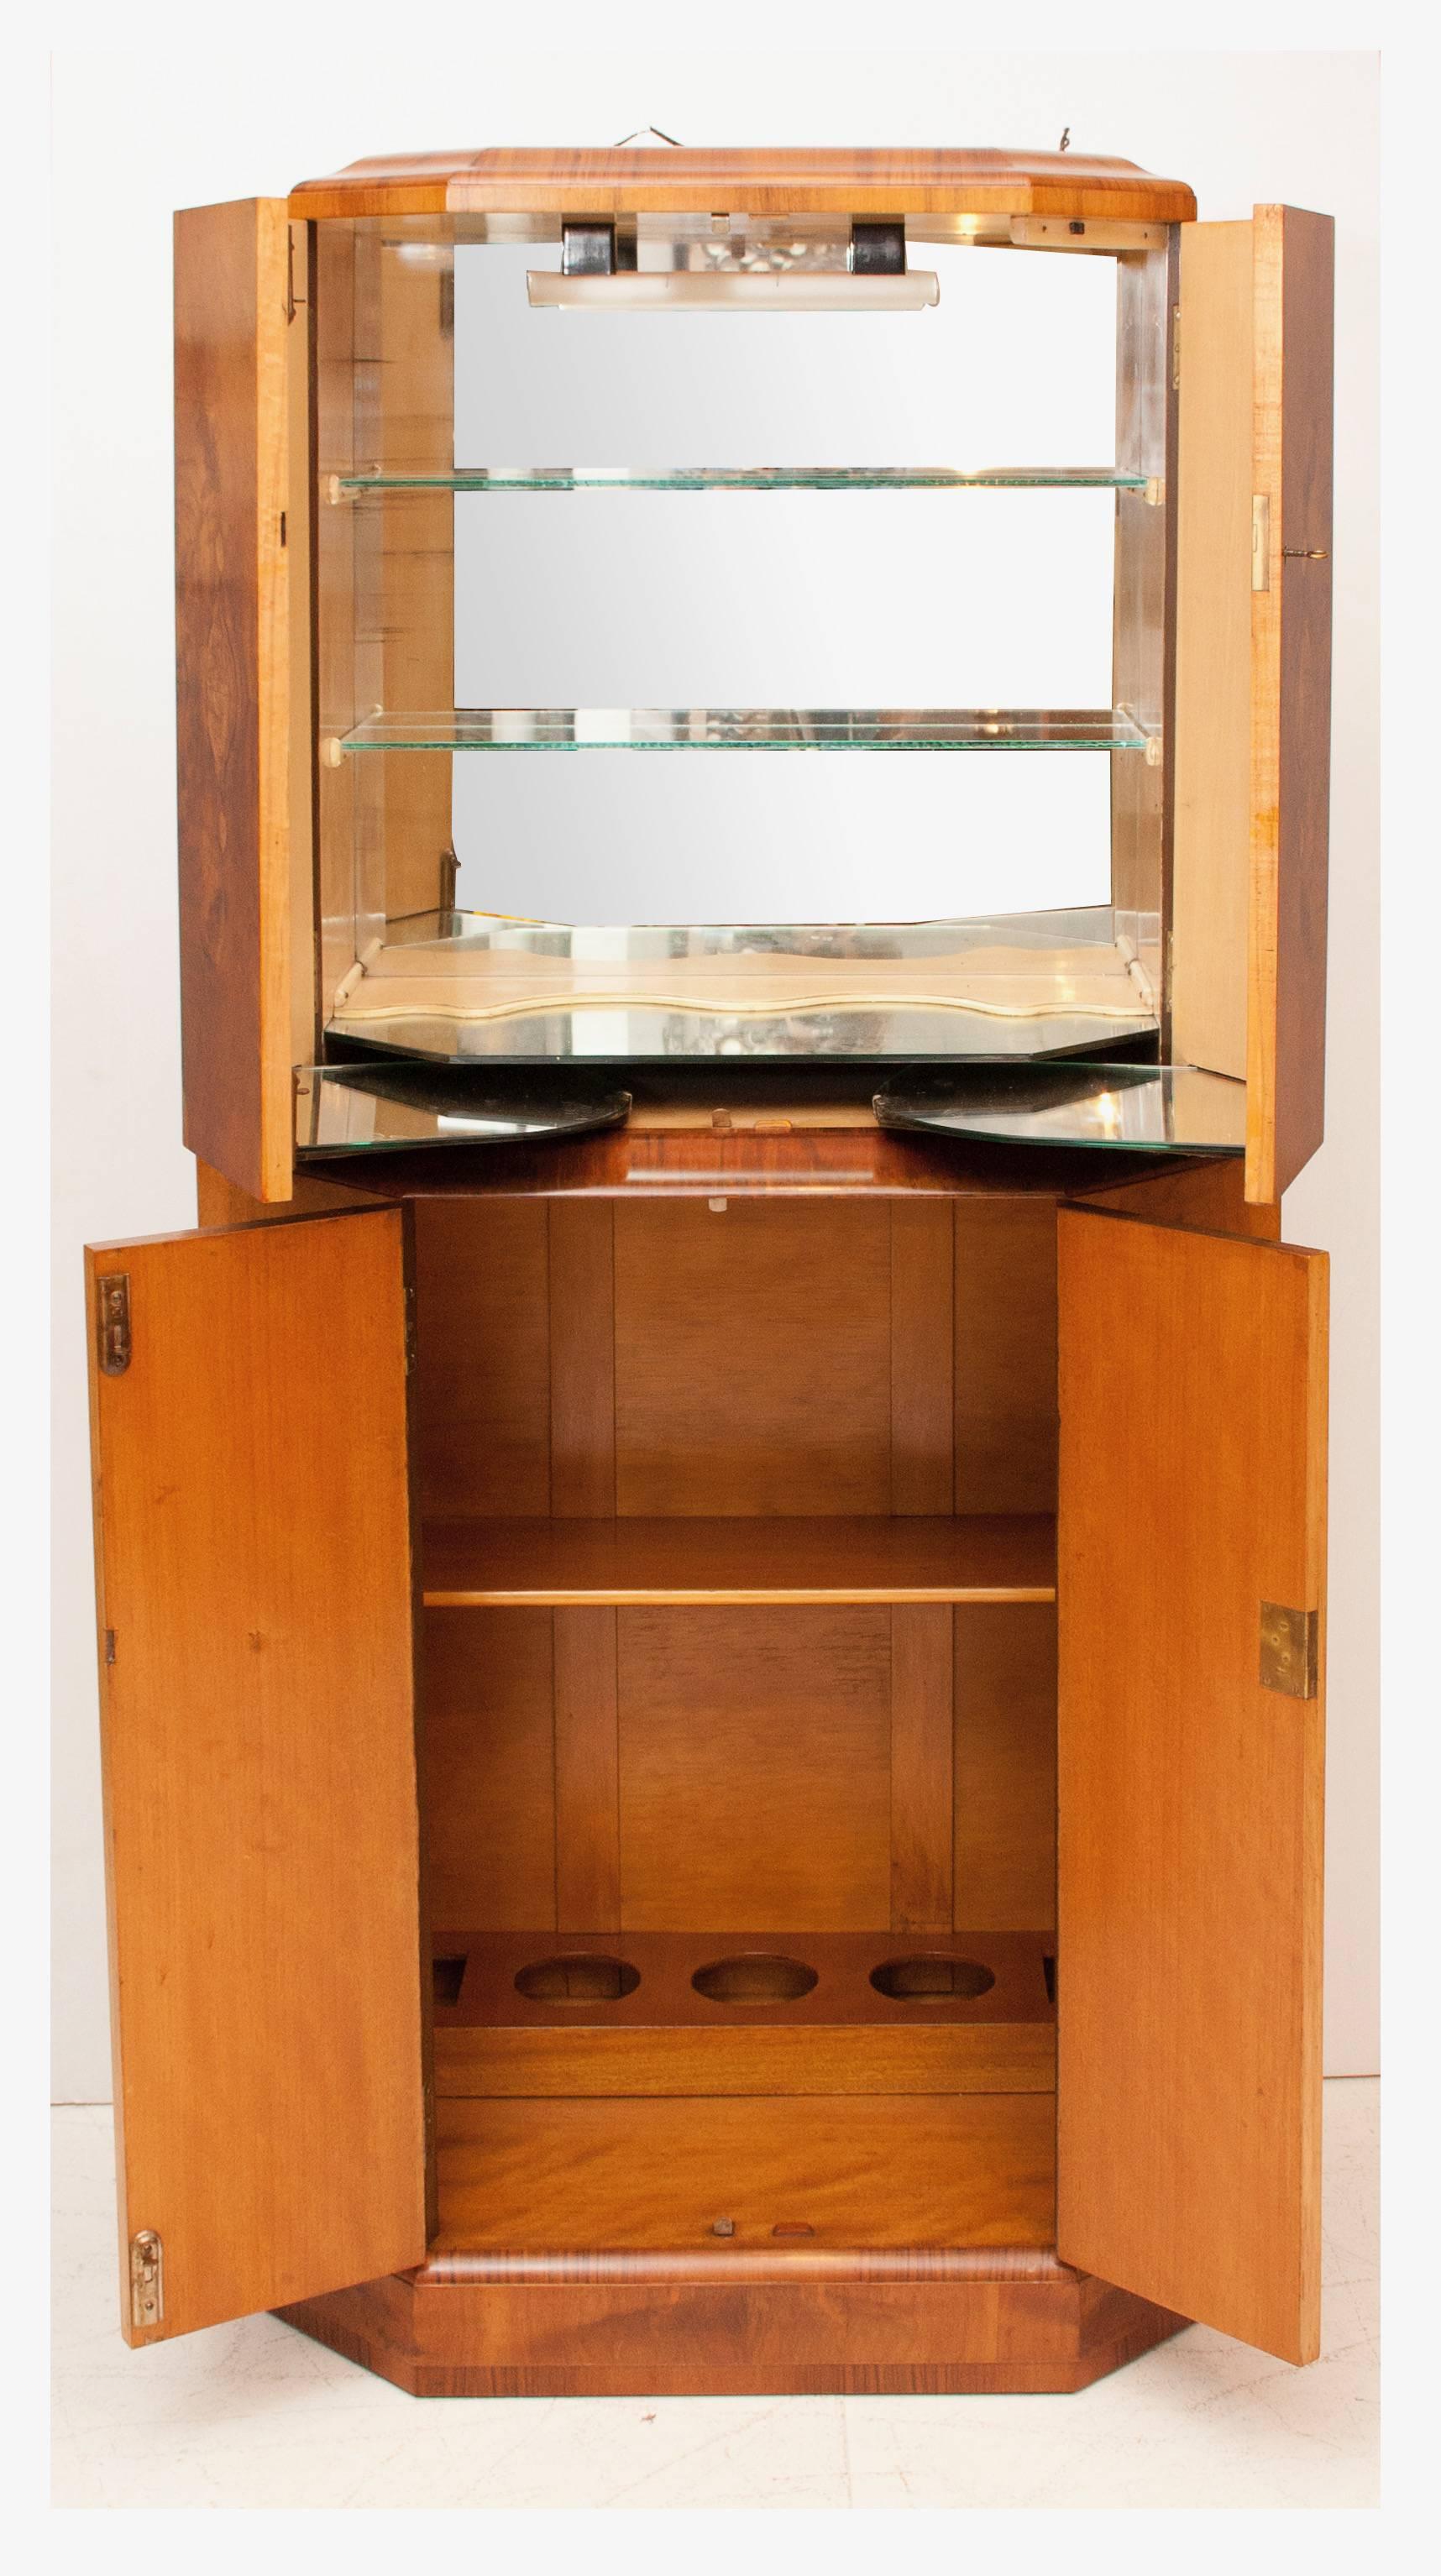 Art Deco cocktail bar
Art Deco cocktail cabinet in a beautiful figured walnut.
The top section opens to reveal mirrored interior, the lower section shelved and fitted for bottle storage.
Measure: 166 cm H, 80 cm W, 44 cm D
British, circa 1930.